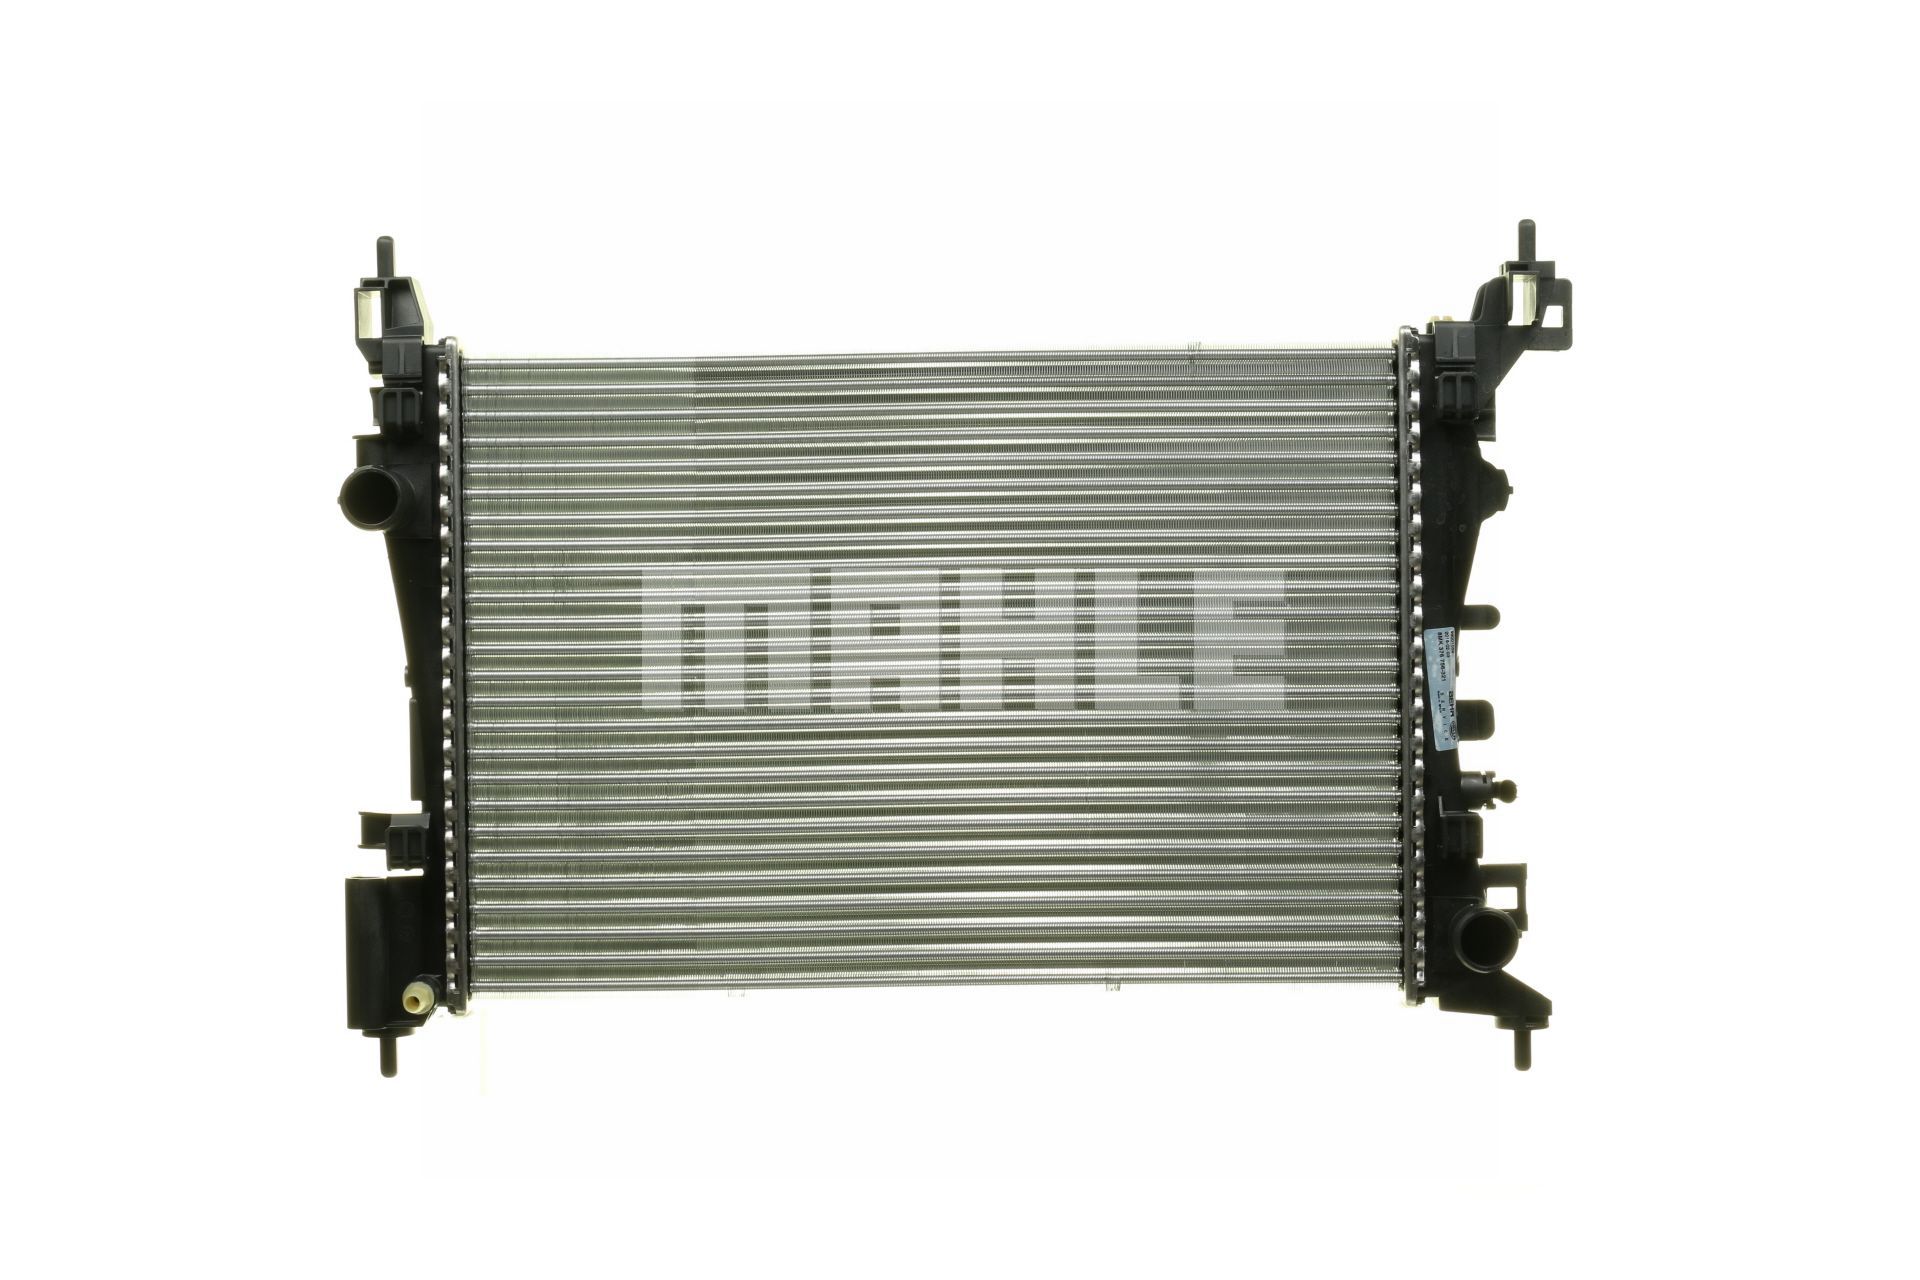 MAHLE ORIGINAL CR 1182 000P Engine radiator 540 x 375 x 26 mm, Mechanically jointed cooling fins